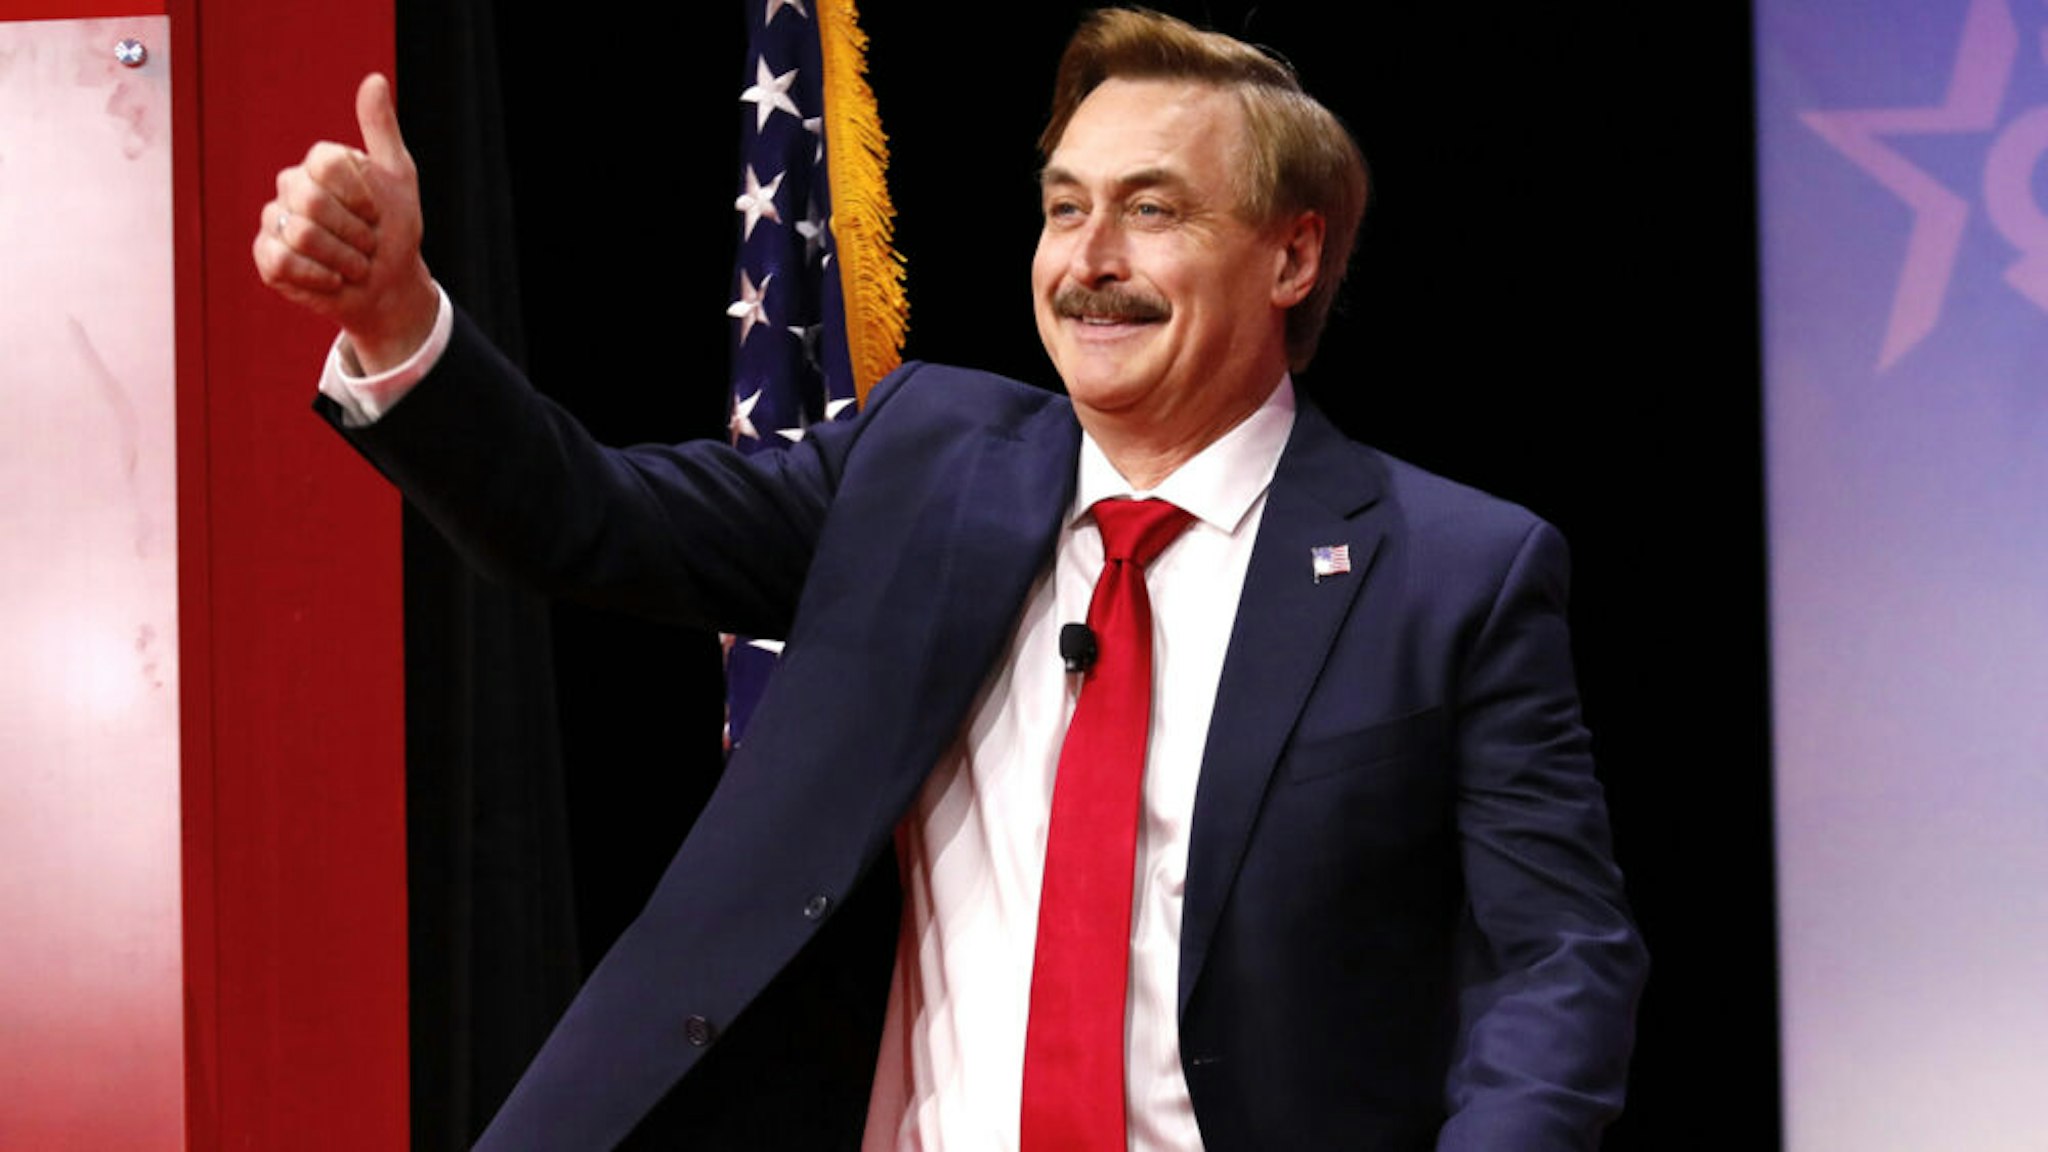 Mike Lindell, president and chief executive officer of My Pillow Inc., arrives to speak at the Conservative Political Action Conference (CPAC) in National Harbor, Maryland, U.S., on Thursday, Feb. 28, 2019. President Trump will attend this year's Conservative Political Action Conference on his return from a summit with North Korea leader Kim Jong Un in Hanoi, according to a White House official.